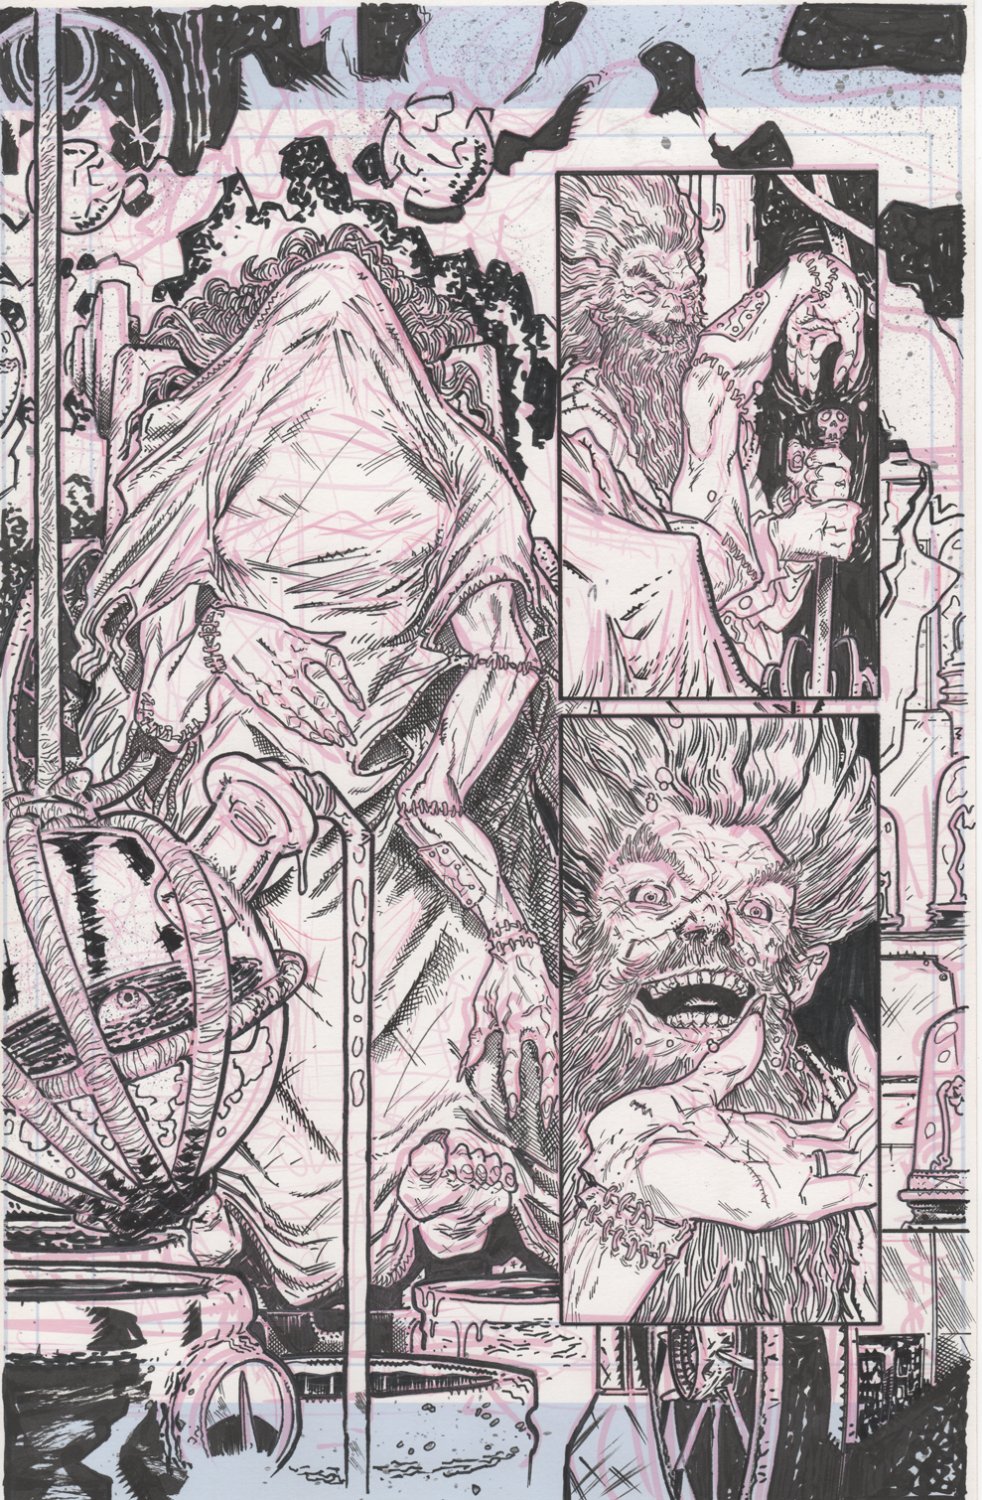 Image of Heavy Metal #287 page 01: Living Dead Girl Issue 287 Page 01